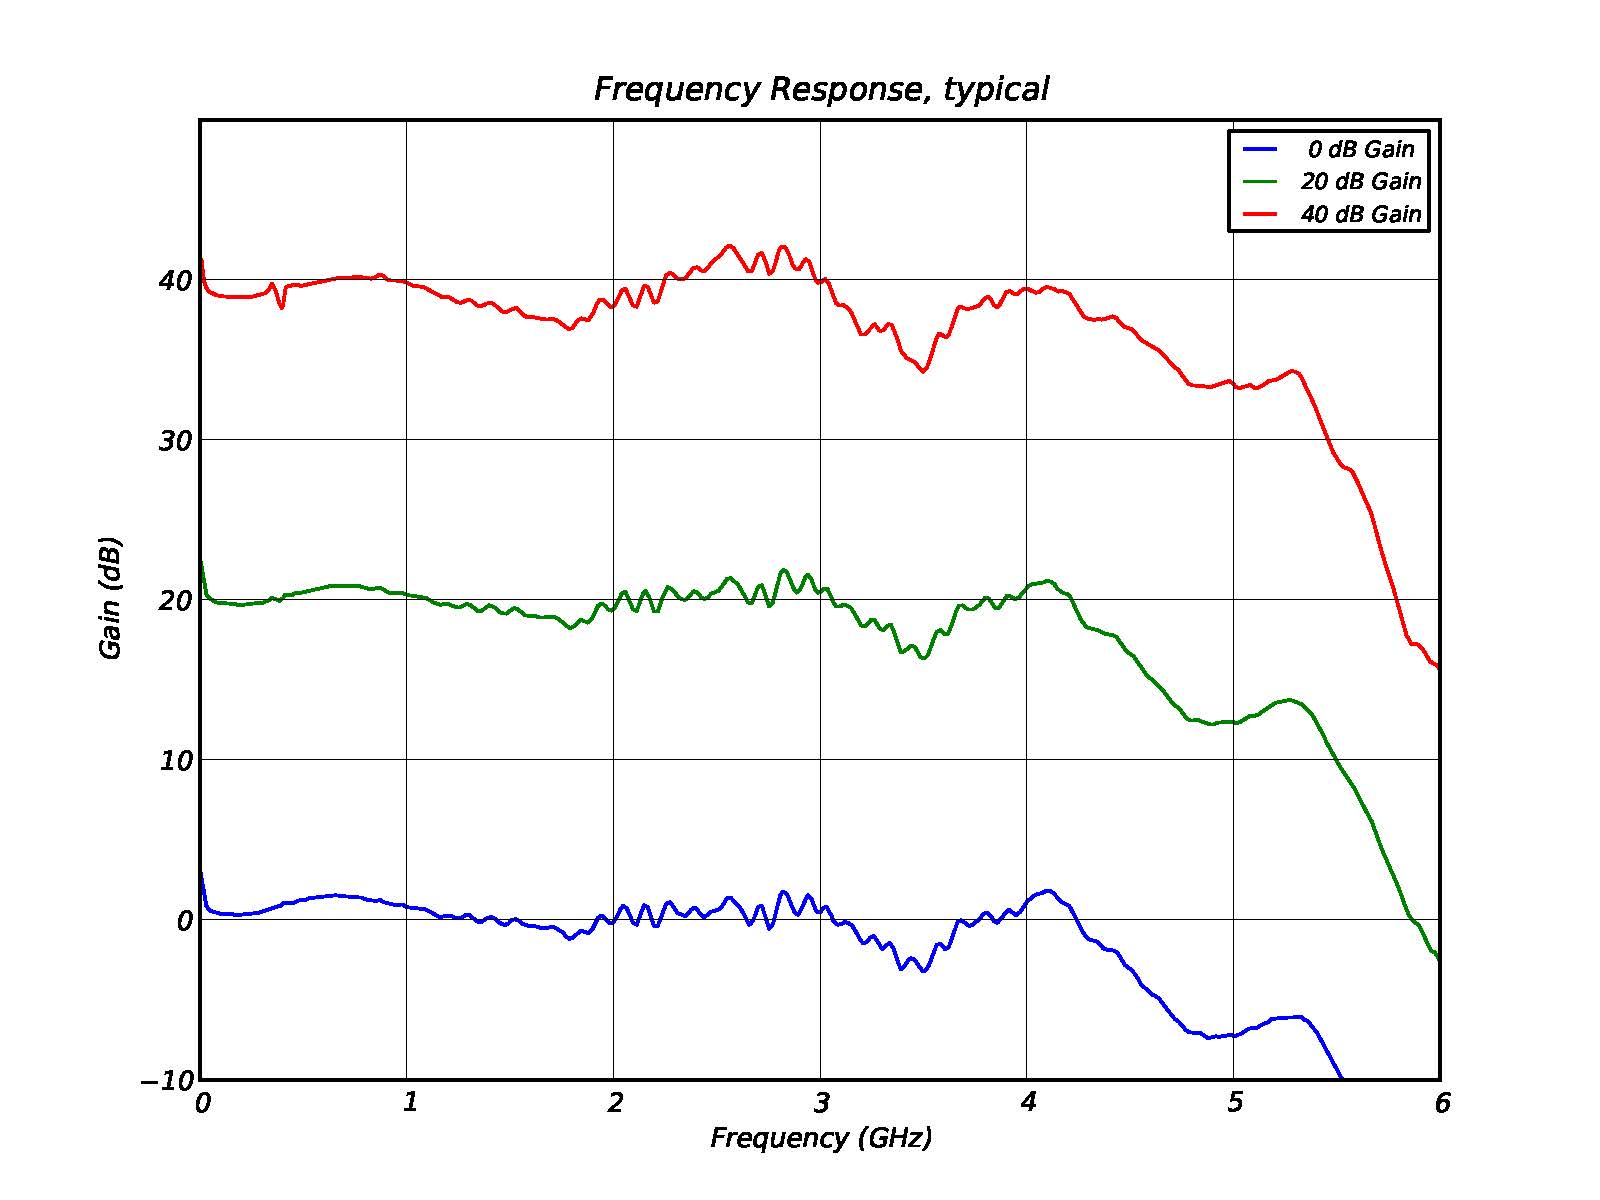 DAA Frequency Response